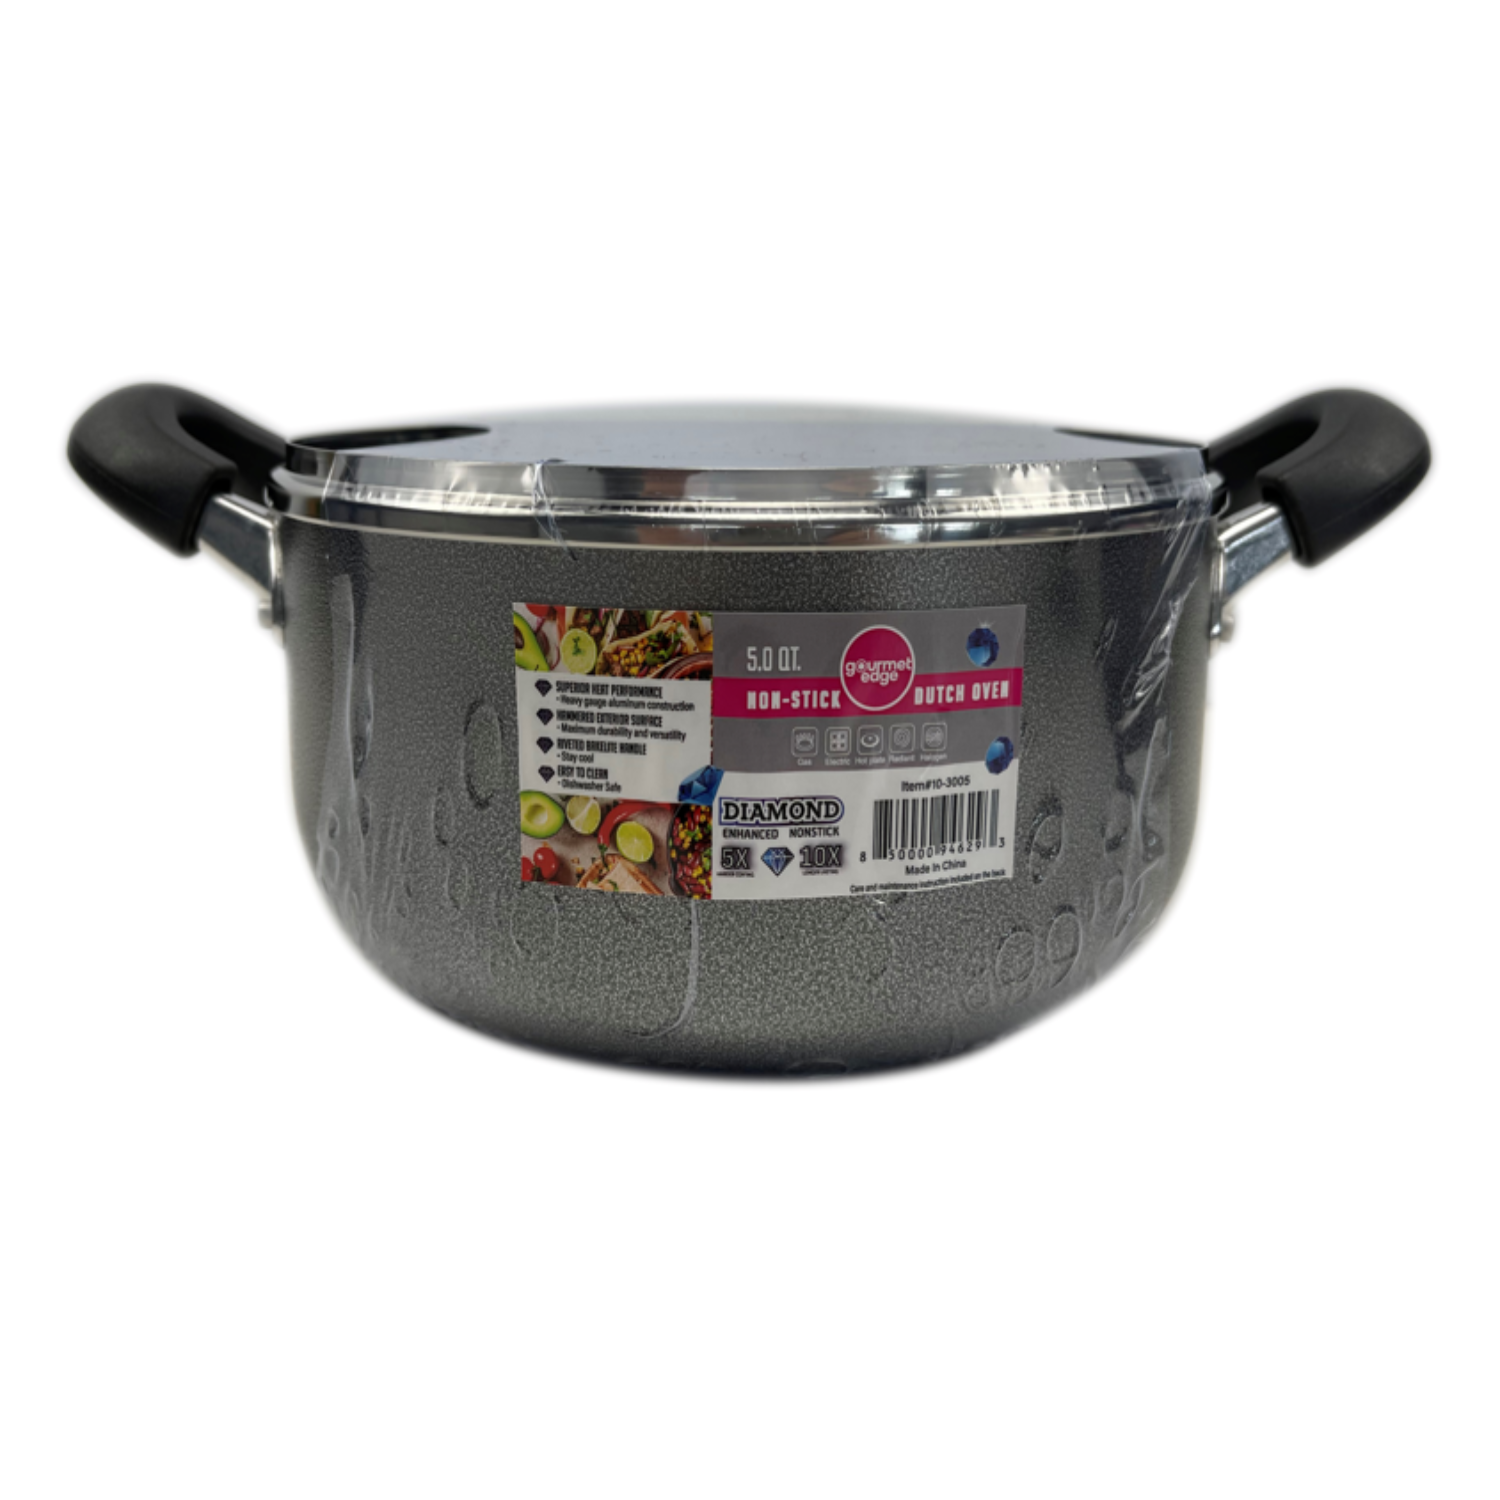 Not A Square Pan 12/5qt Nonstick Chicken Fryer with Cover